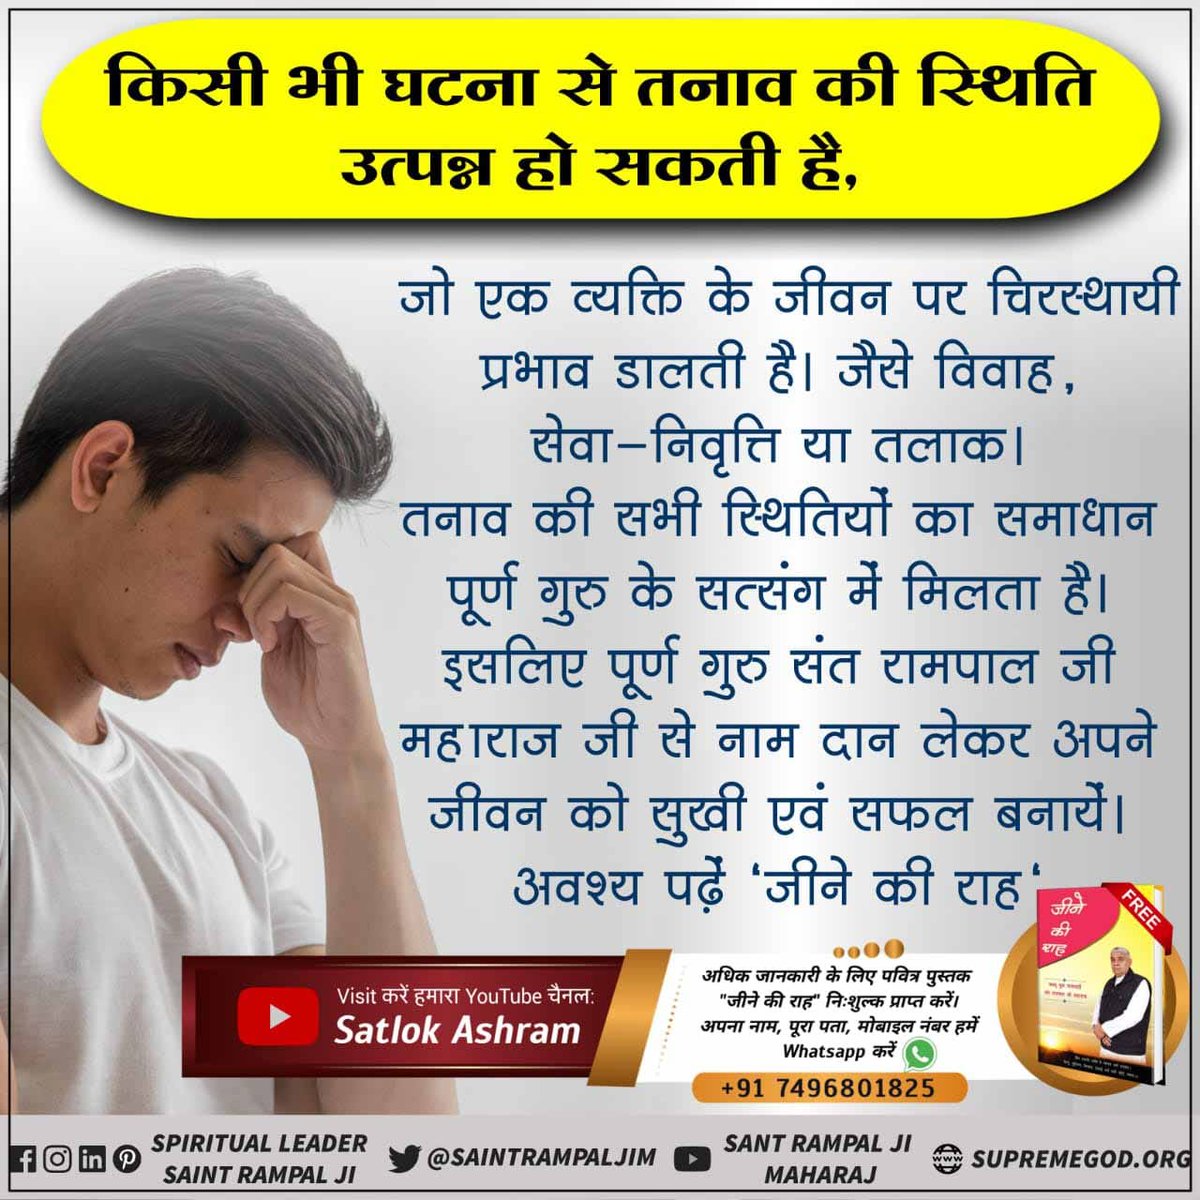 #GodMorningSaturday
Physical, mental and financial benefits are obtained in the company of the perfect Guru. Therefore, make your life happy and successful by taking the name donation from the perfect Guru Saint Rampal Ji Maharaj. Must read 'Jeene Ki Raah'
#SaturdayMotivation